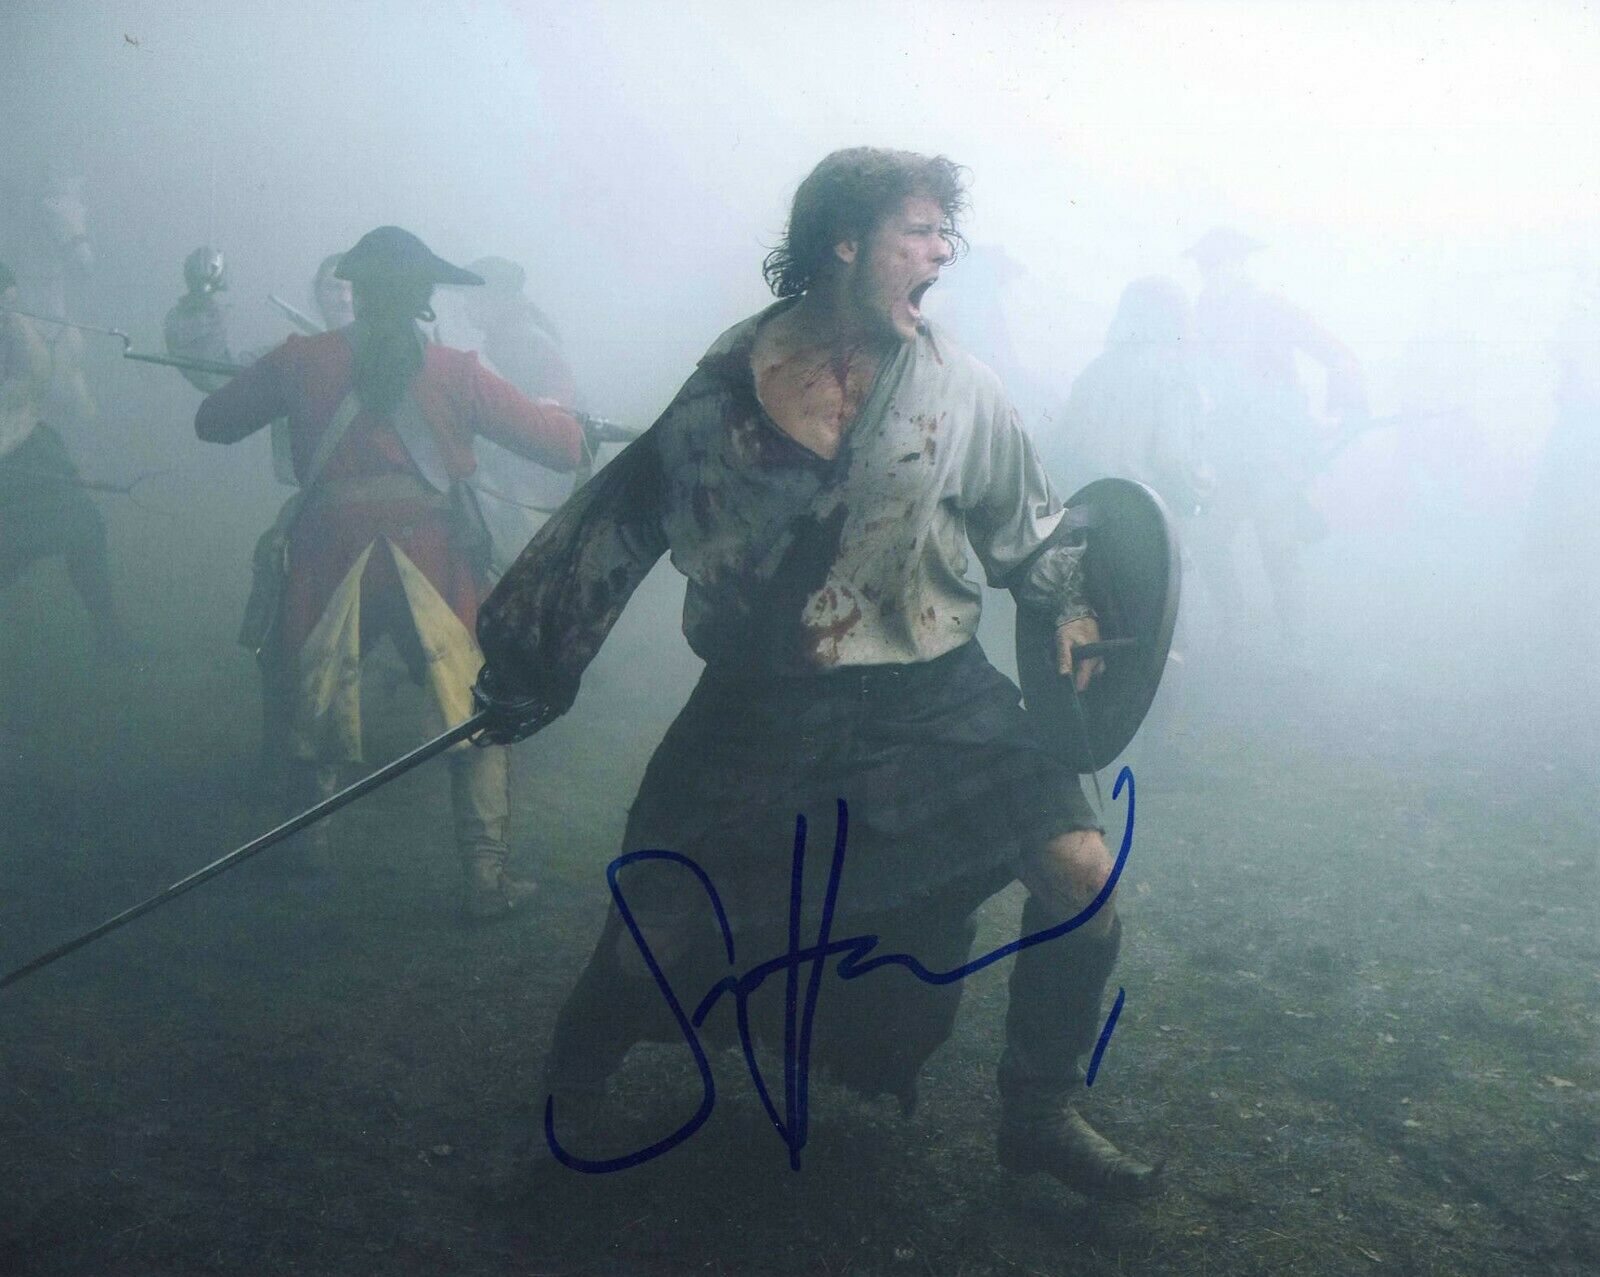 Sam Heughan Authentic Autographed 8x10 Photo